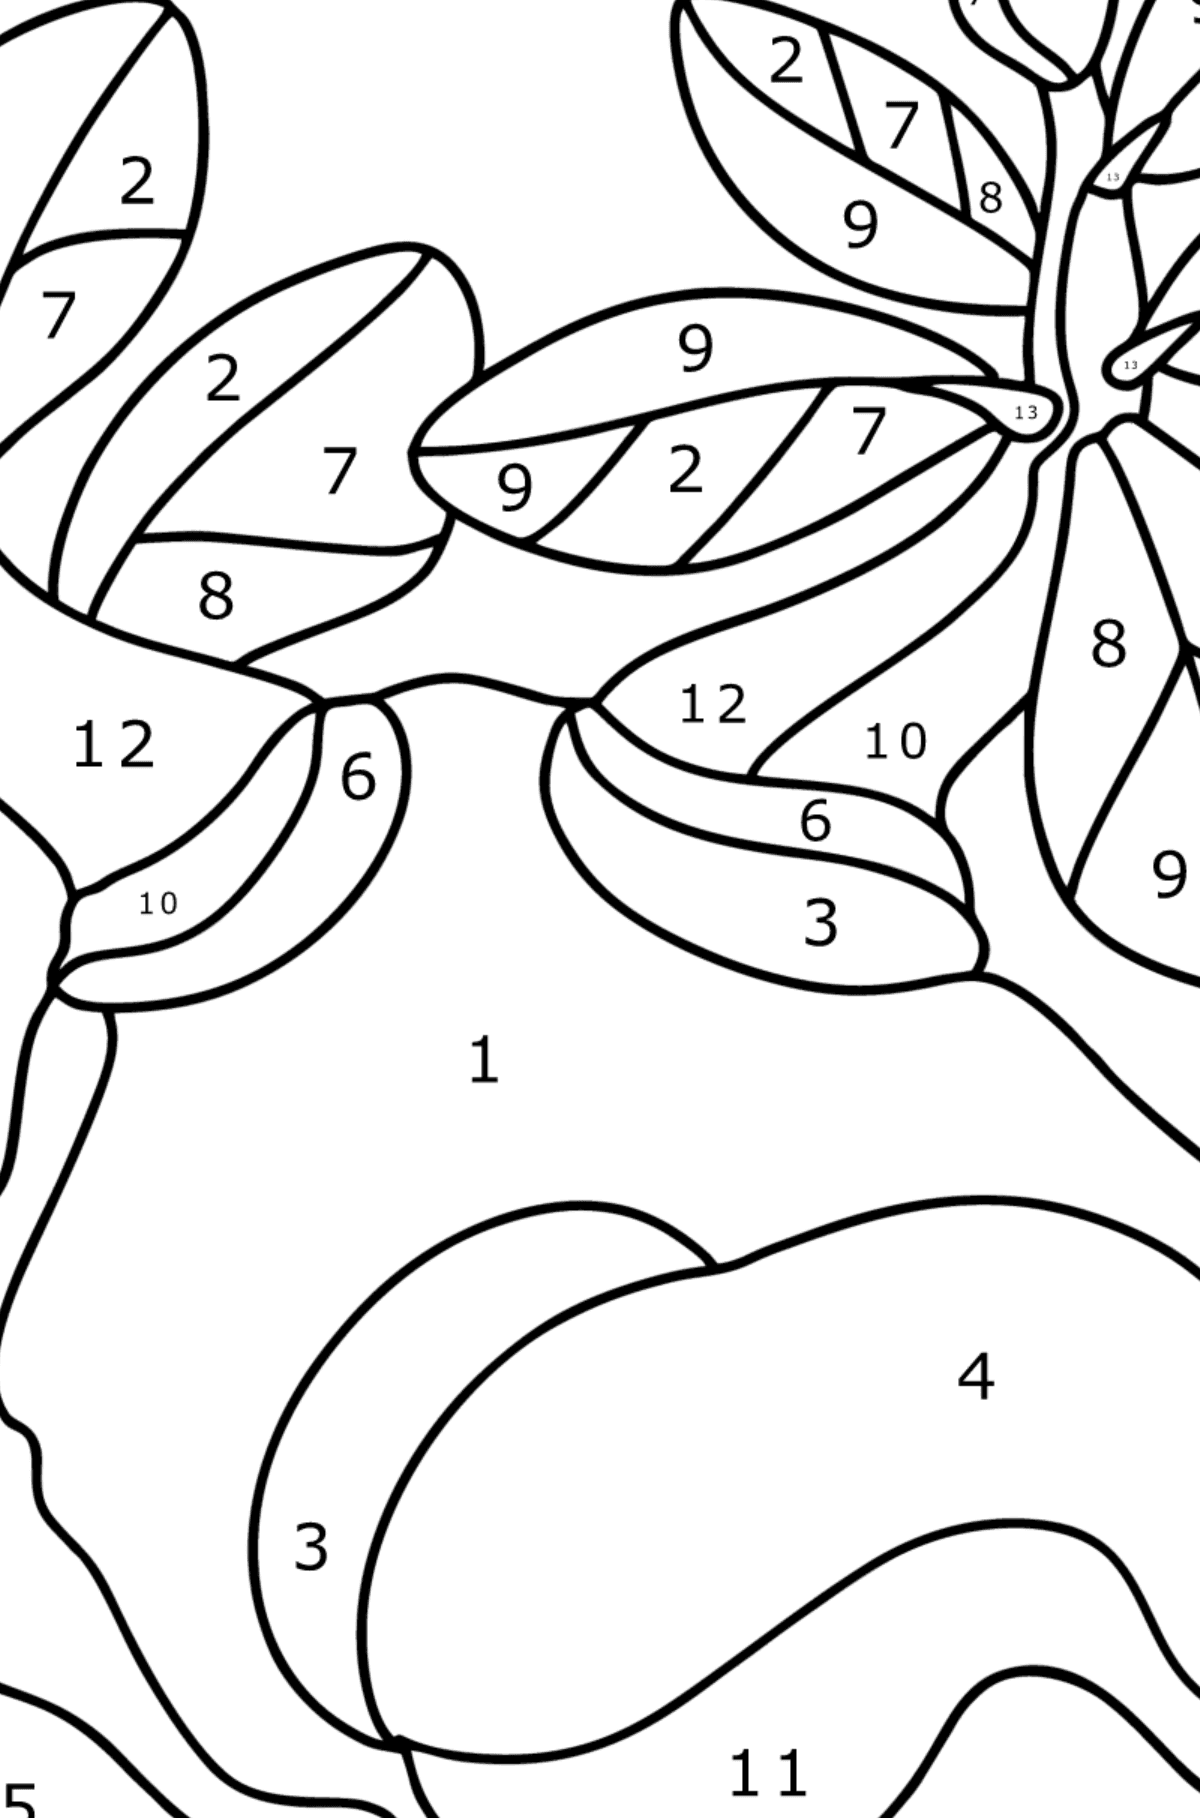 Adenium coloring page - Coloring by Numbers for Kids